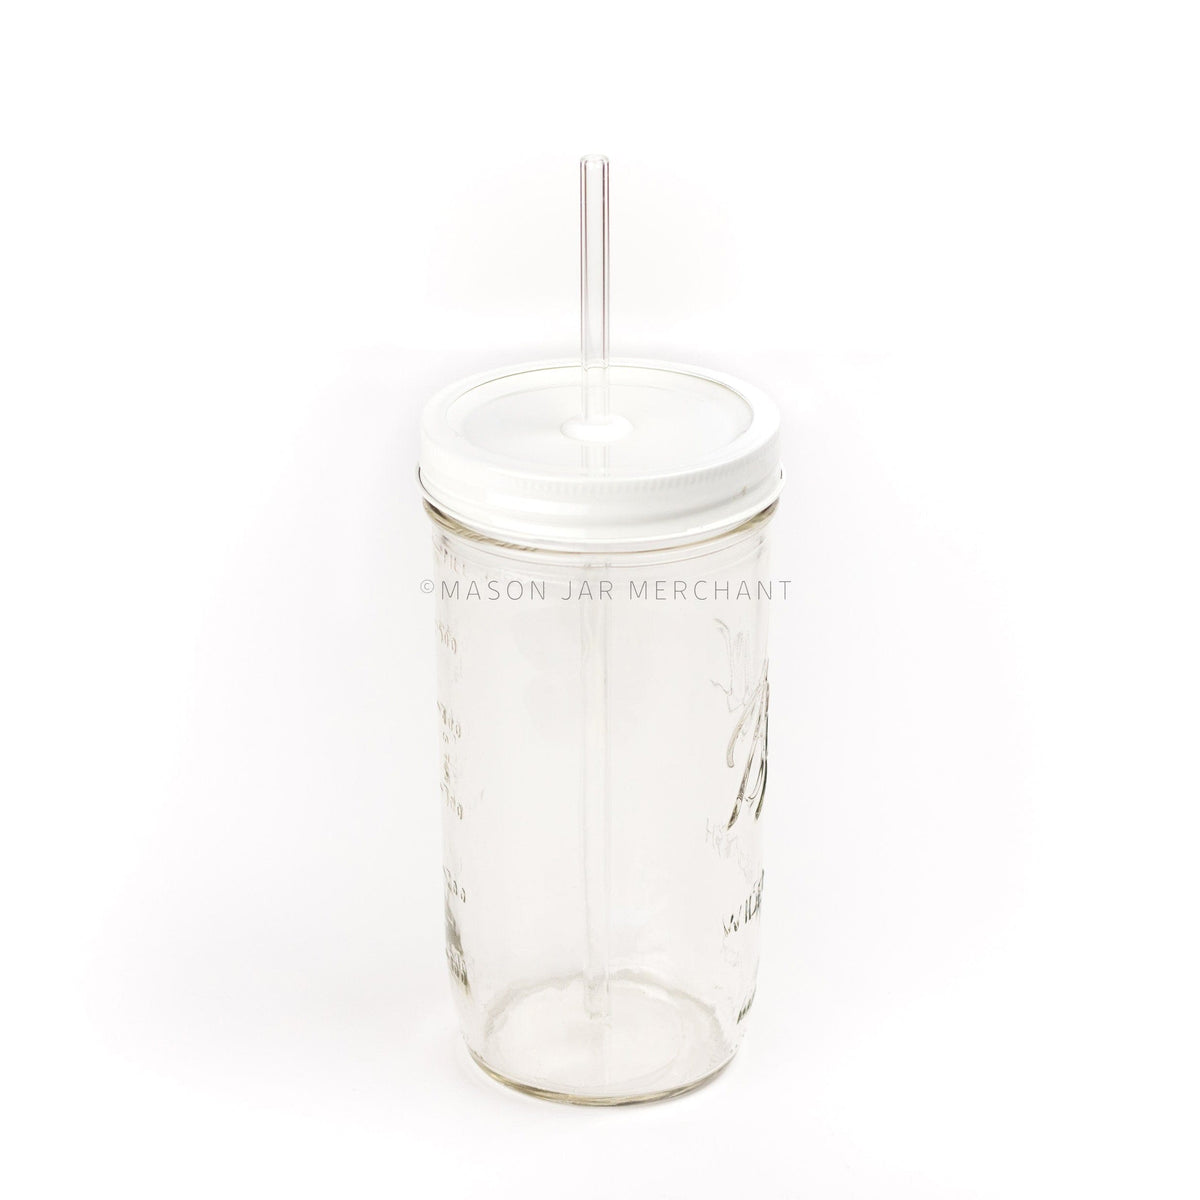 a white custom painted straw lid on a 24 oz glass mason jar with a glass reusable straw